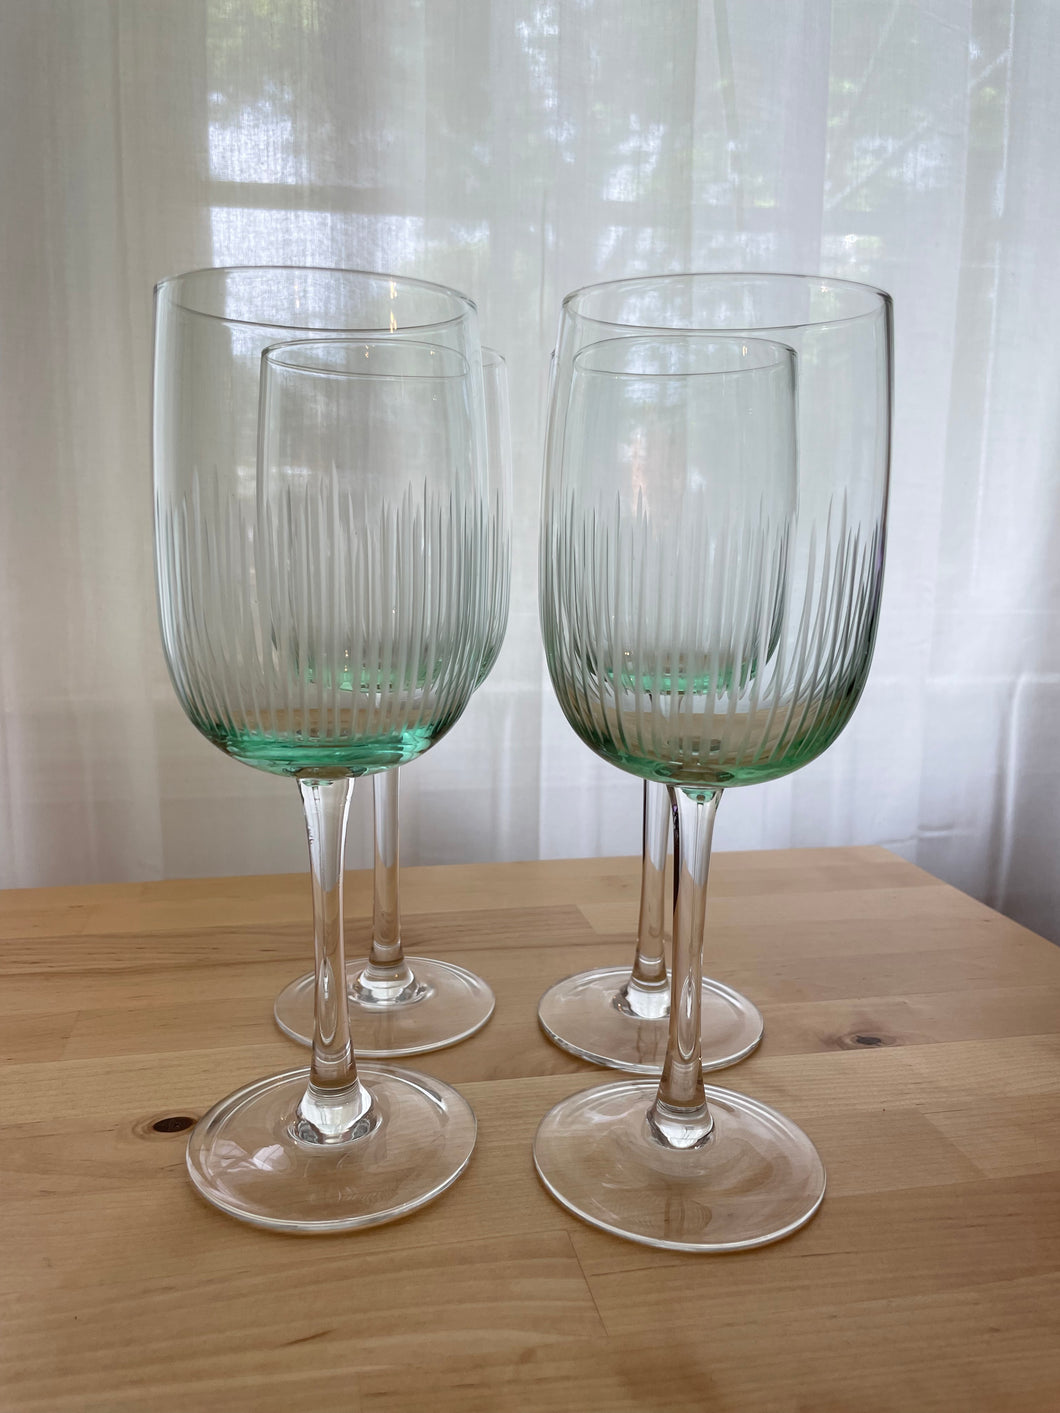 Set of Four Large Mint Green Etched Wine Glasses with a Clear Stem